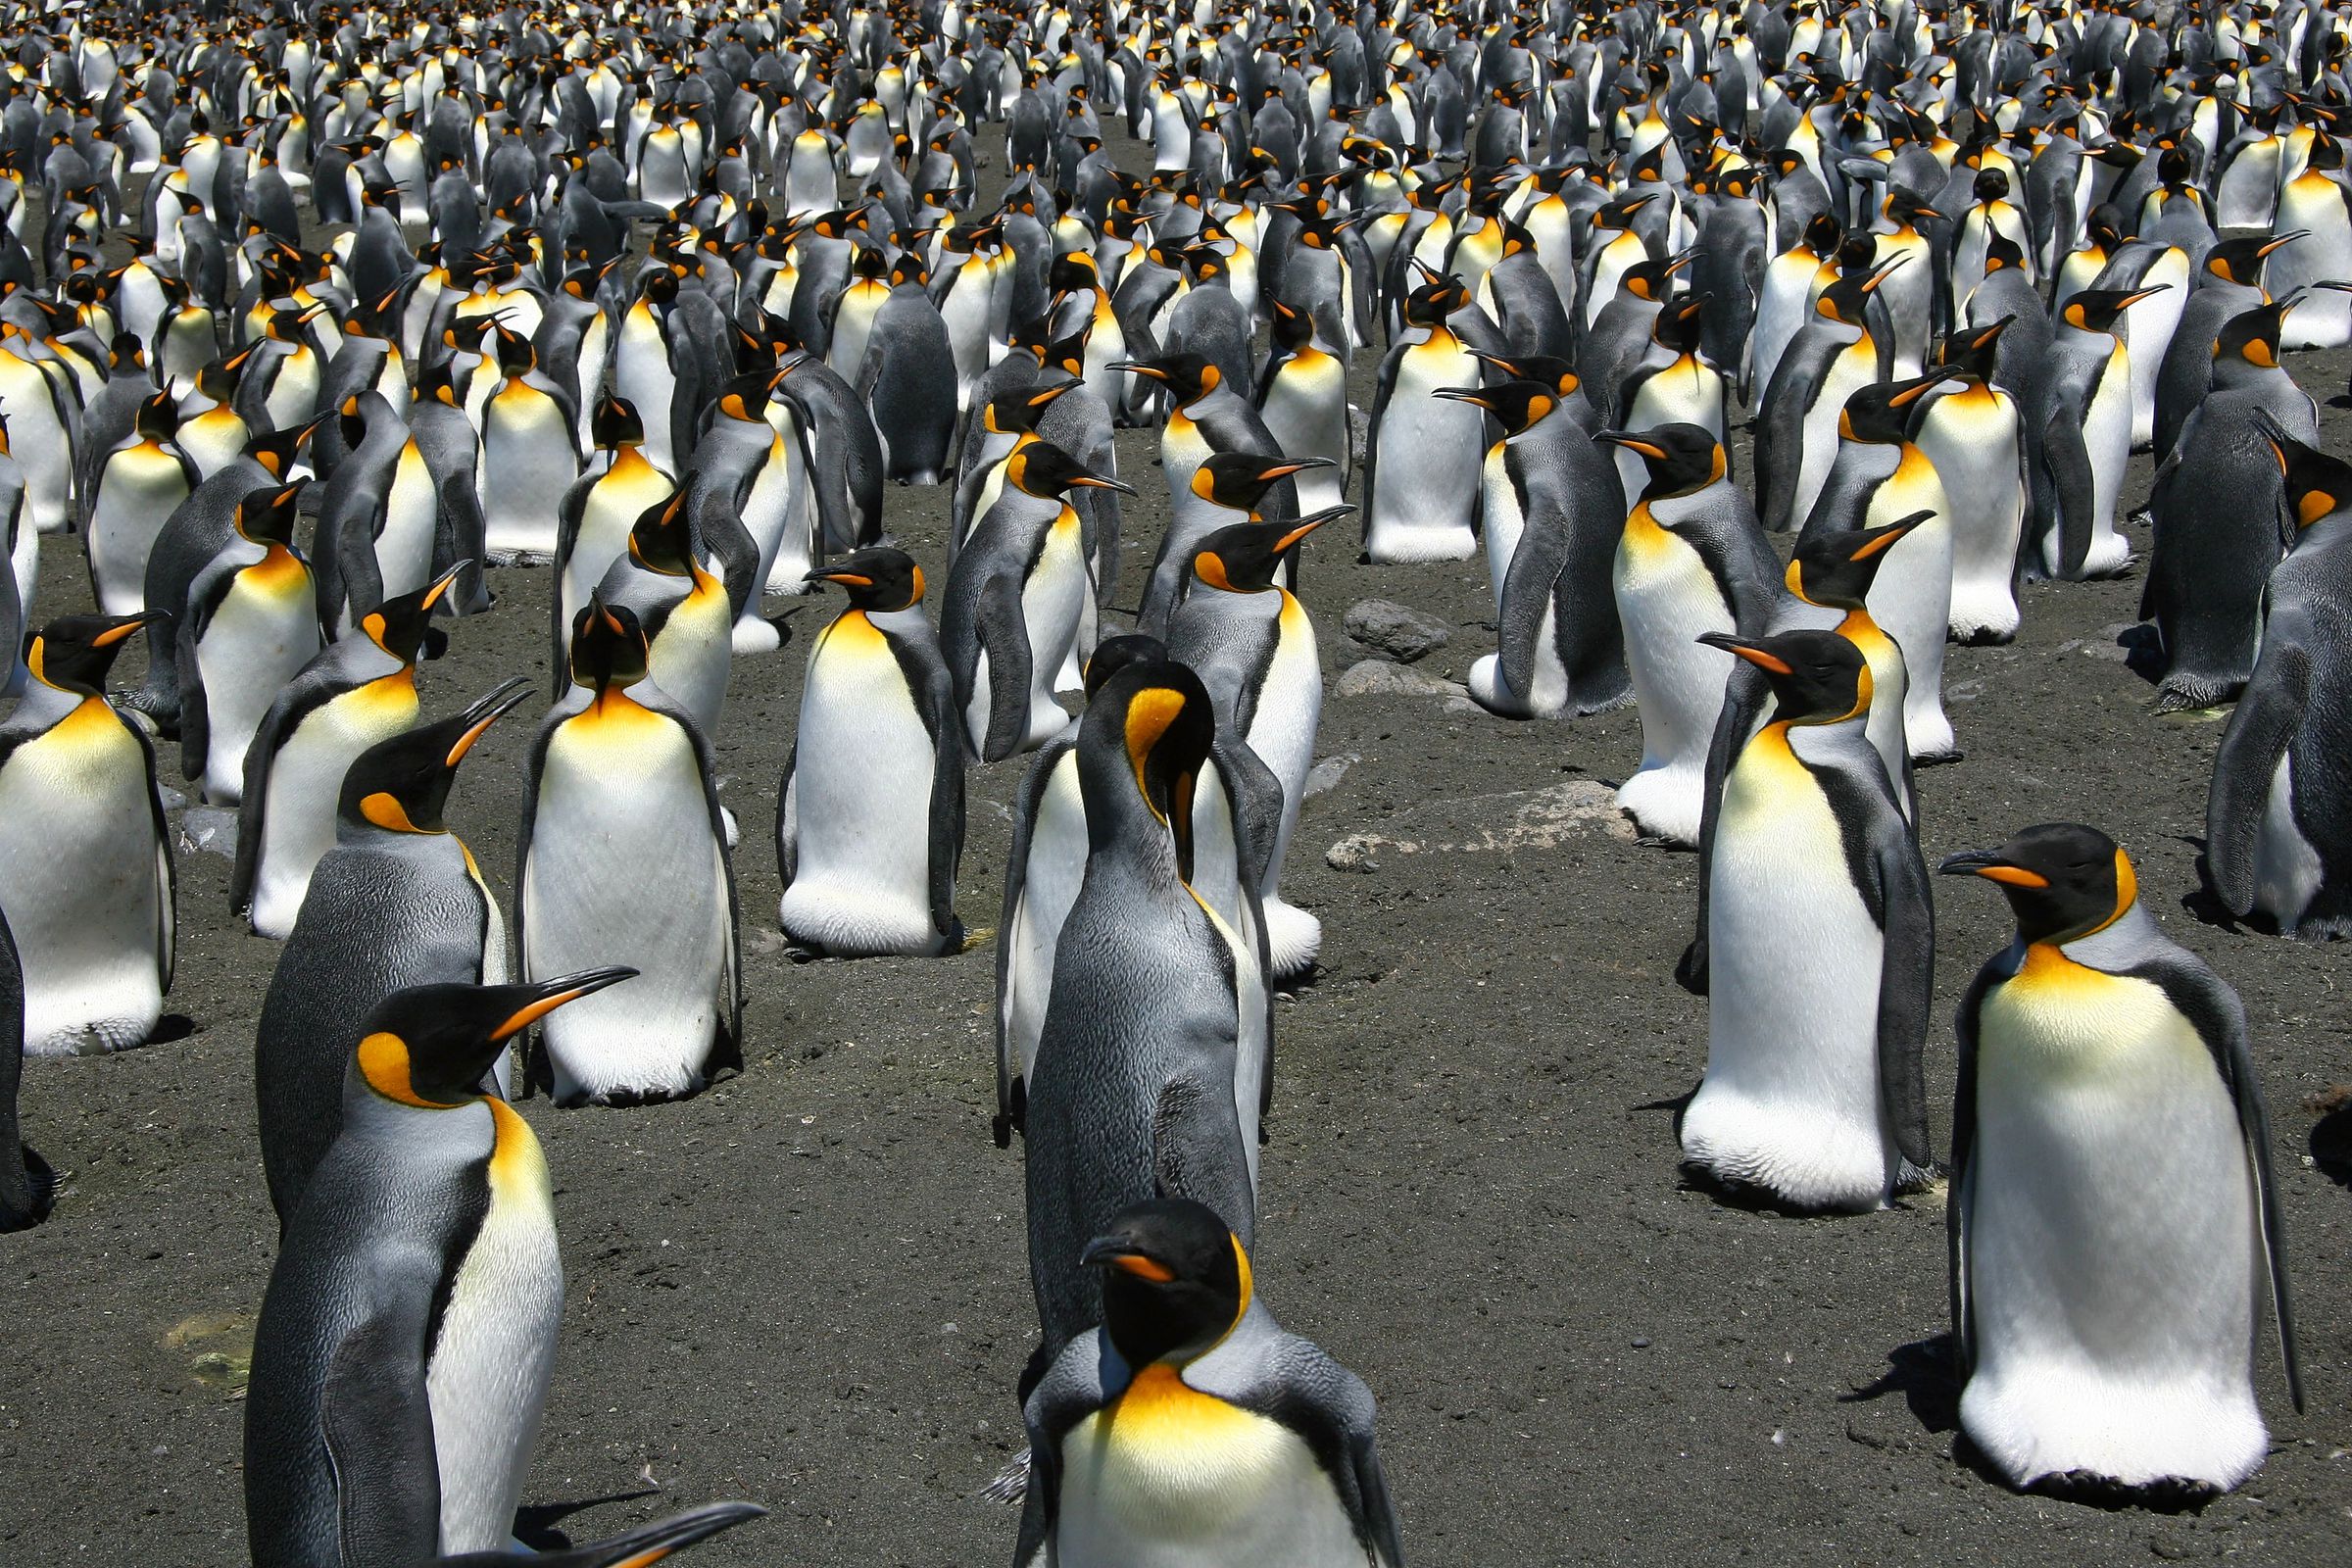 King penguins from the Possession Island, Crozet Archipelago.